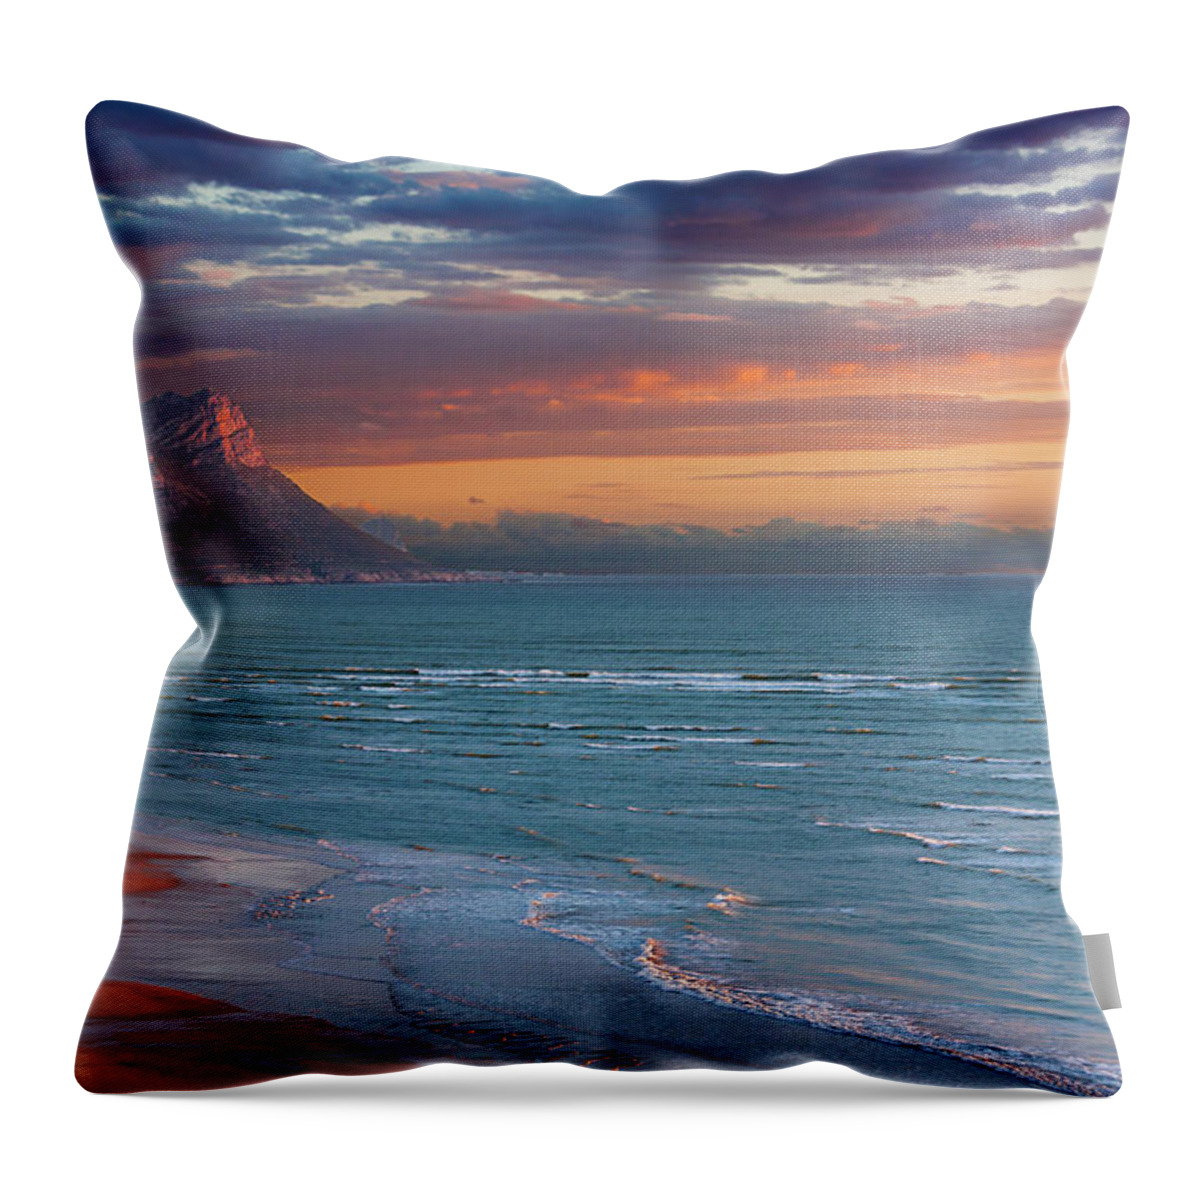 Water's Edge Throw Pillow featuring the photograph Strand Beach At Sunset by Jesus Villalba